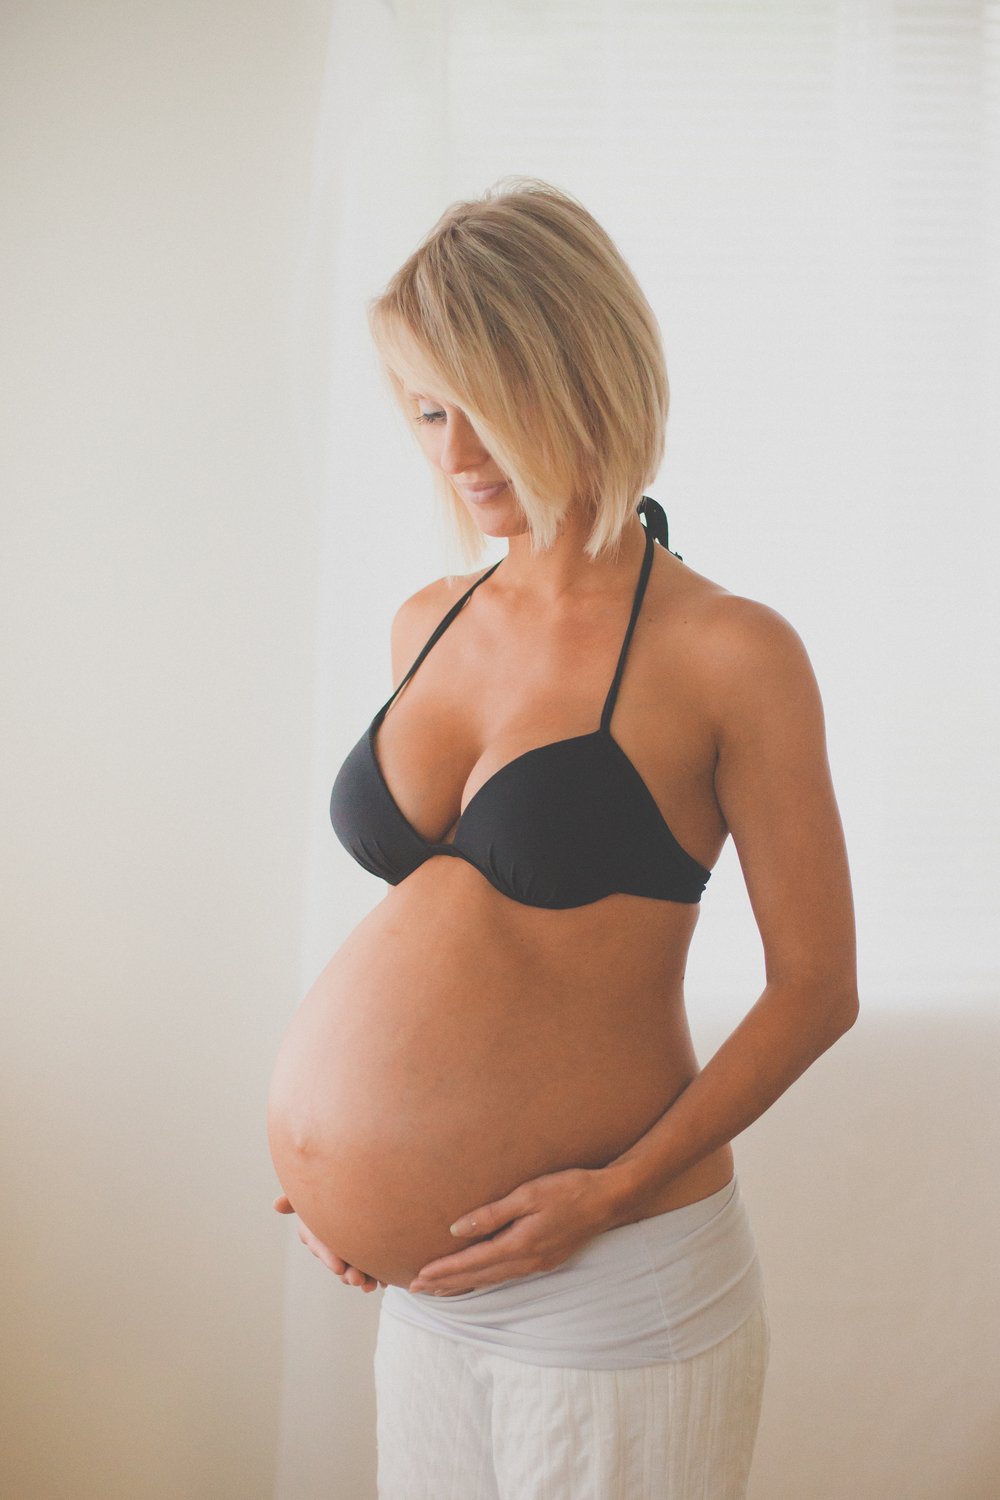 Photo by pornforher with the username @pornforher,  December 20, 2018 at 11:46 PM. The post is about the topic Pregnant and the text says 'I've heard of pregnant women who feel unattractive, and that's just absolutely tragic.

I firmly believe that pregnancy is one of the sexiest, most intimately sensual and feminine thing possible.

I've been lucky enough to be with one pregnant woman, and..'